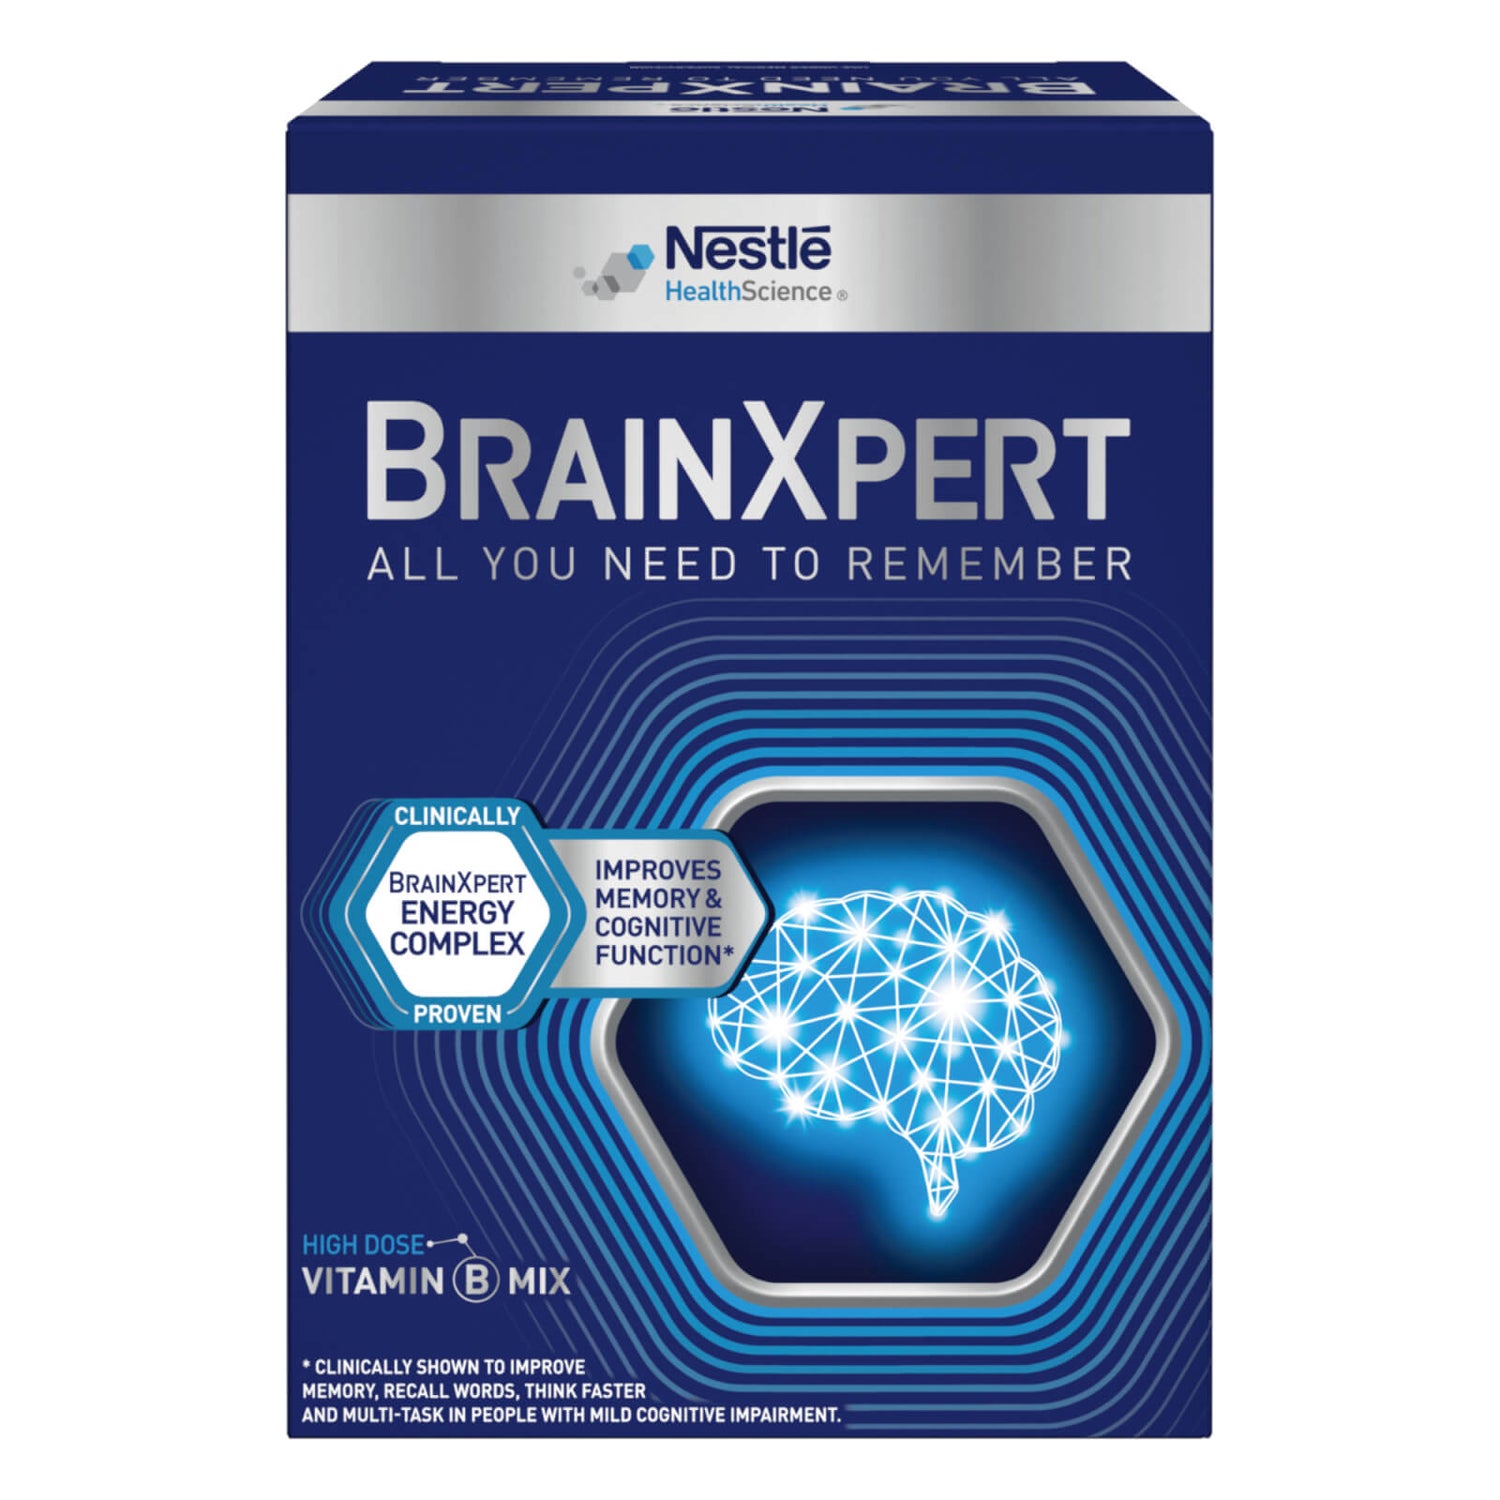 BrainXpert Memory and Cognitive Function - 1 Month Pack